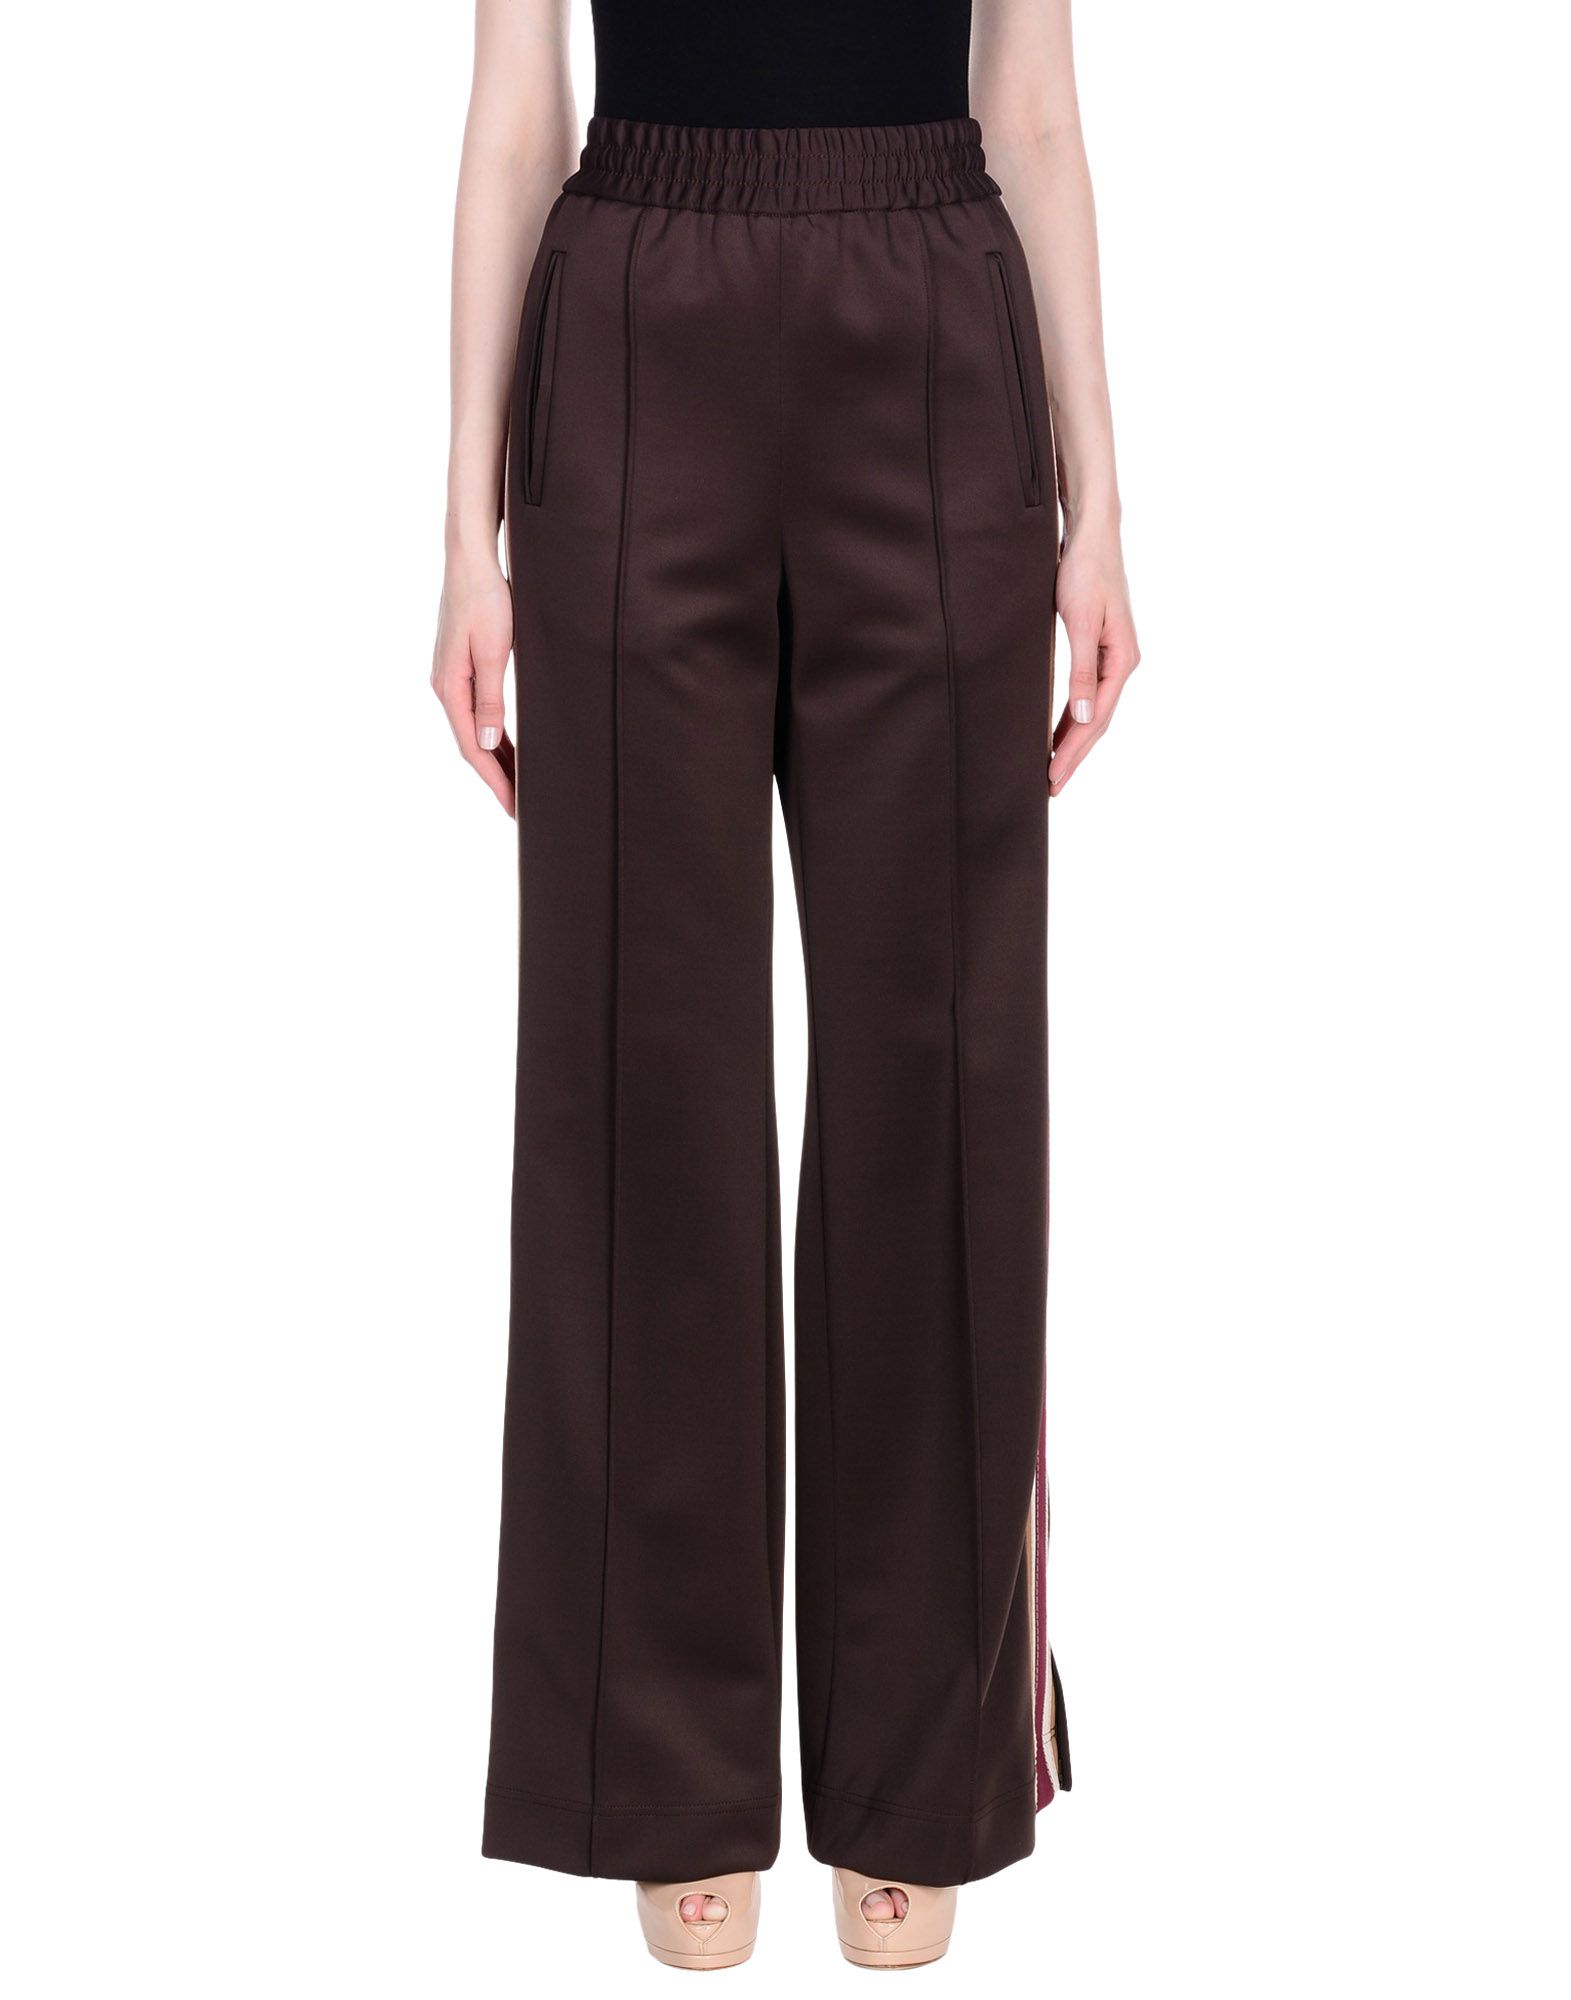 MARC JACOBS trousers,13185289WR 3